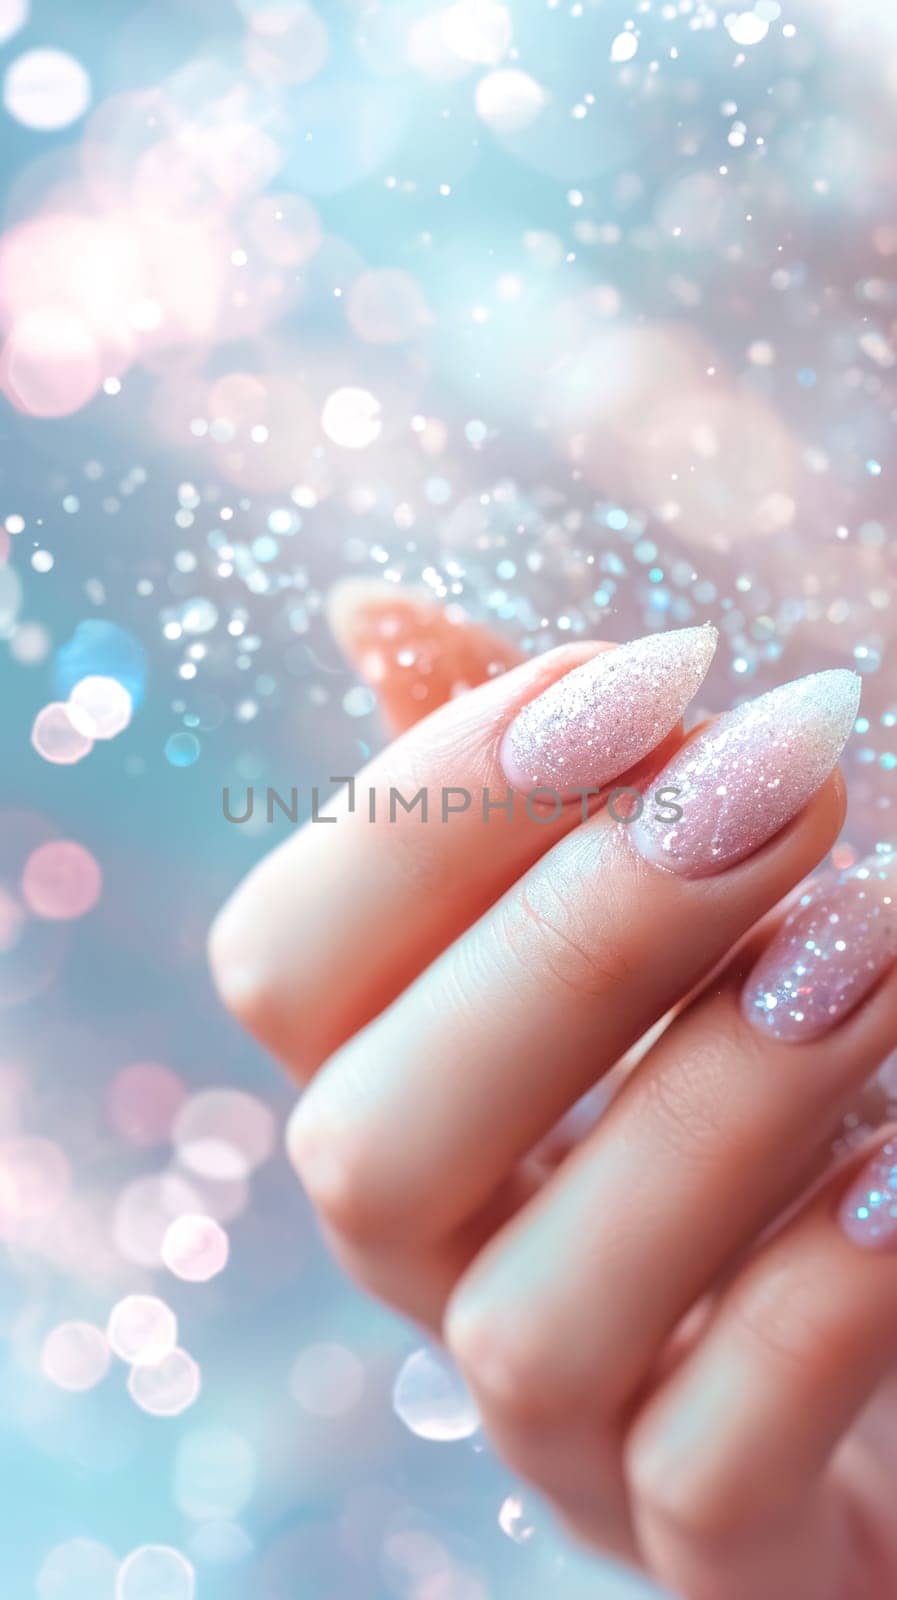 hand showing off beautifully manicured nails with a sparkling, glittery finish, set against a soft, dreamy background with light bokeh, conveying a sense of elegance and attention to beauty detail.